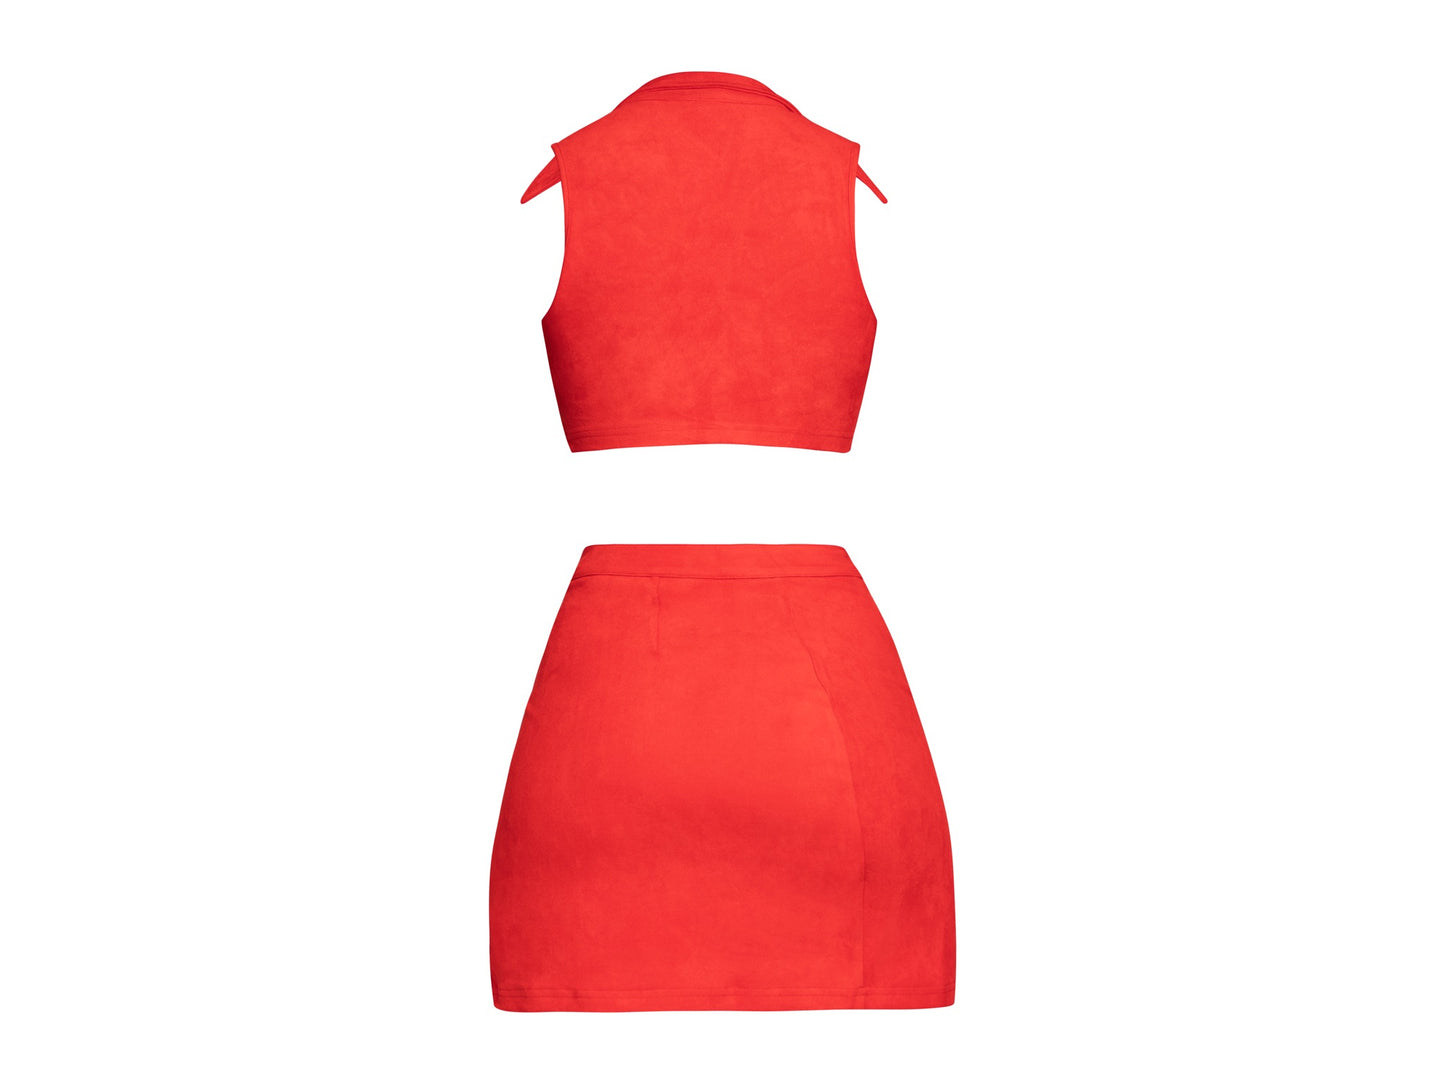 Soothing Arch Red Suede Top